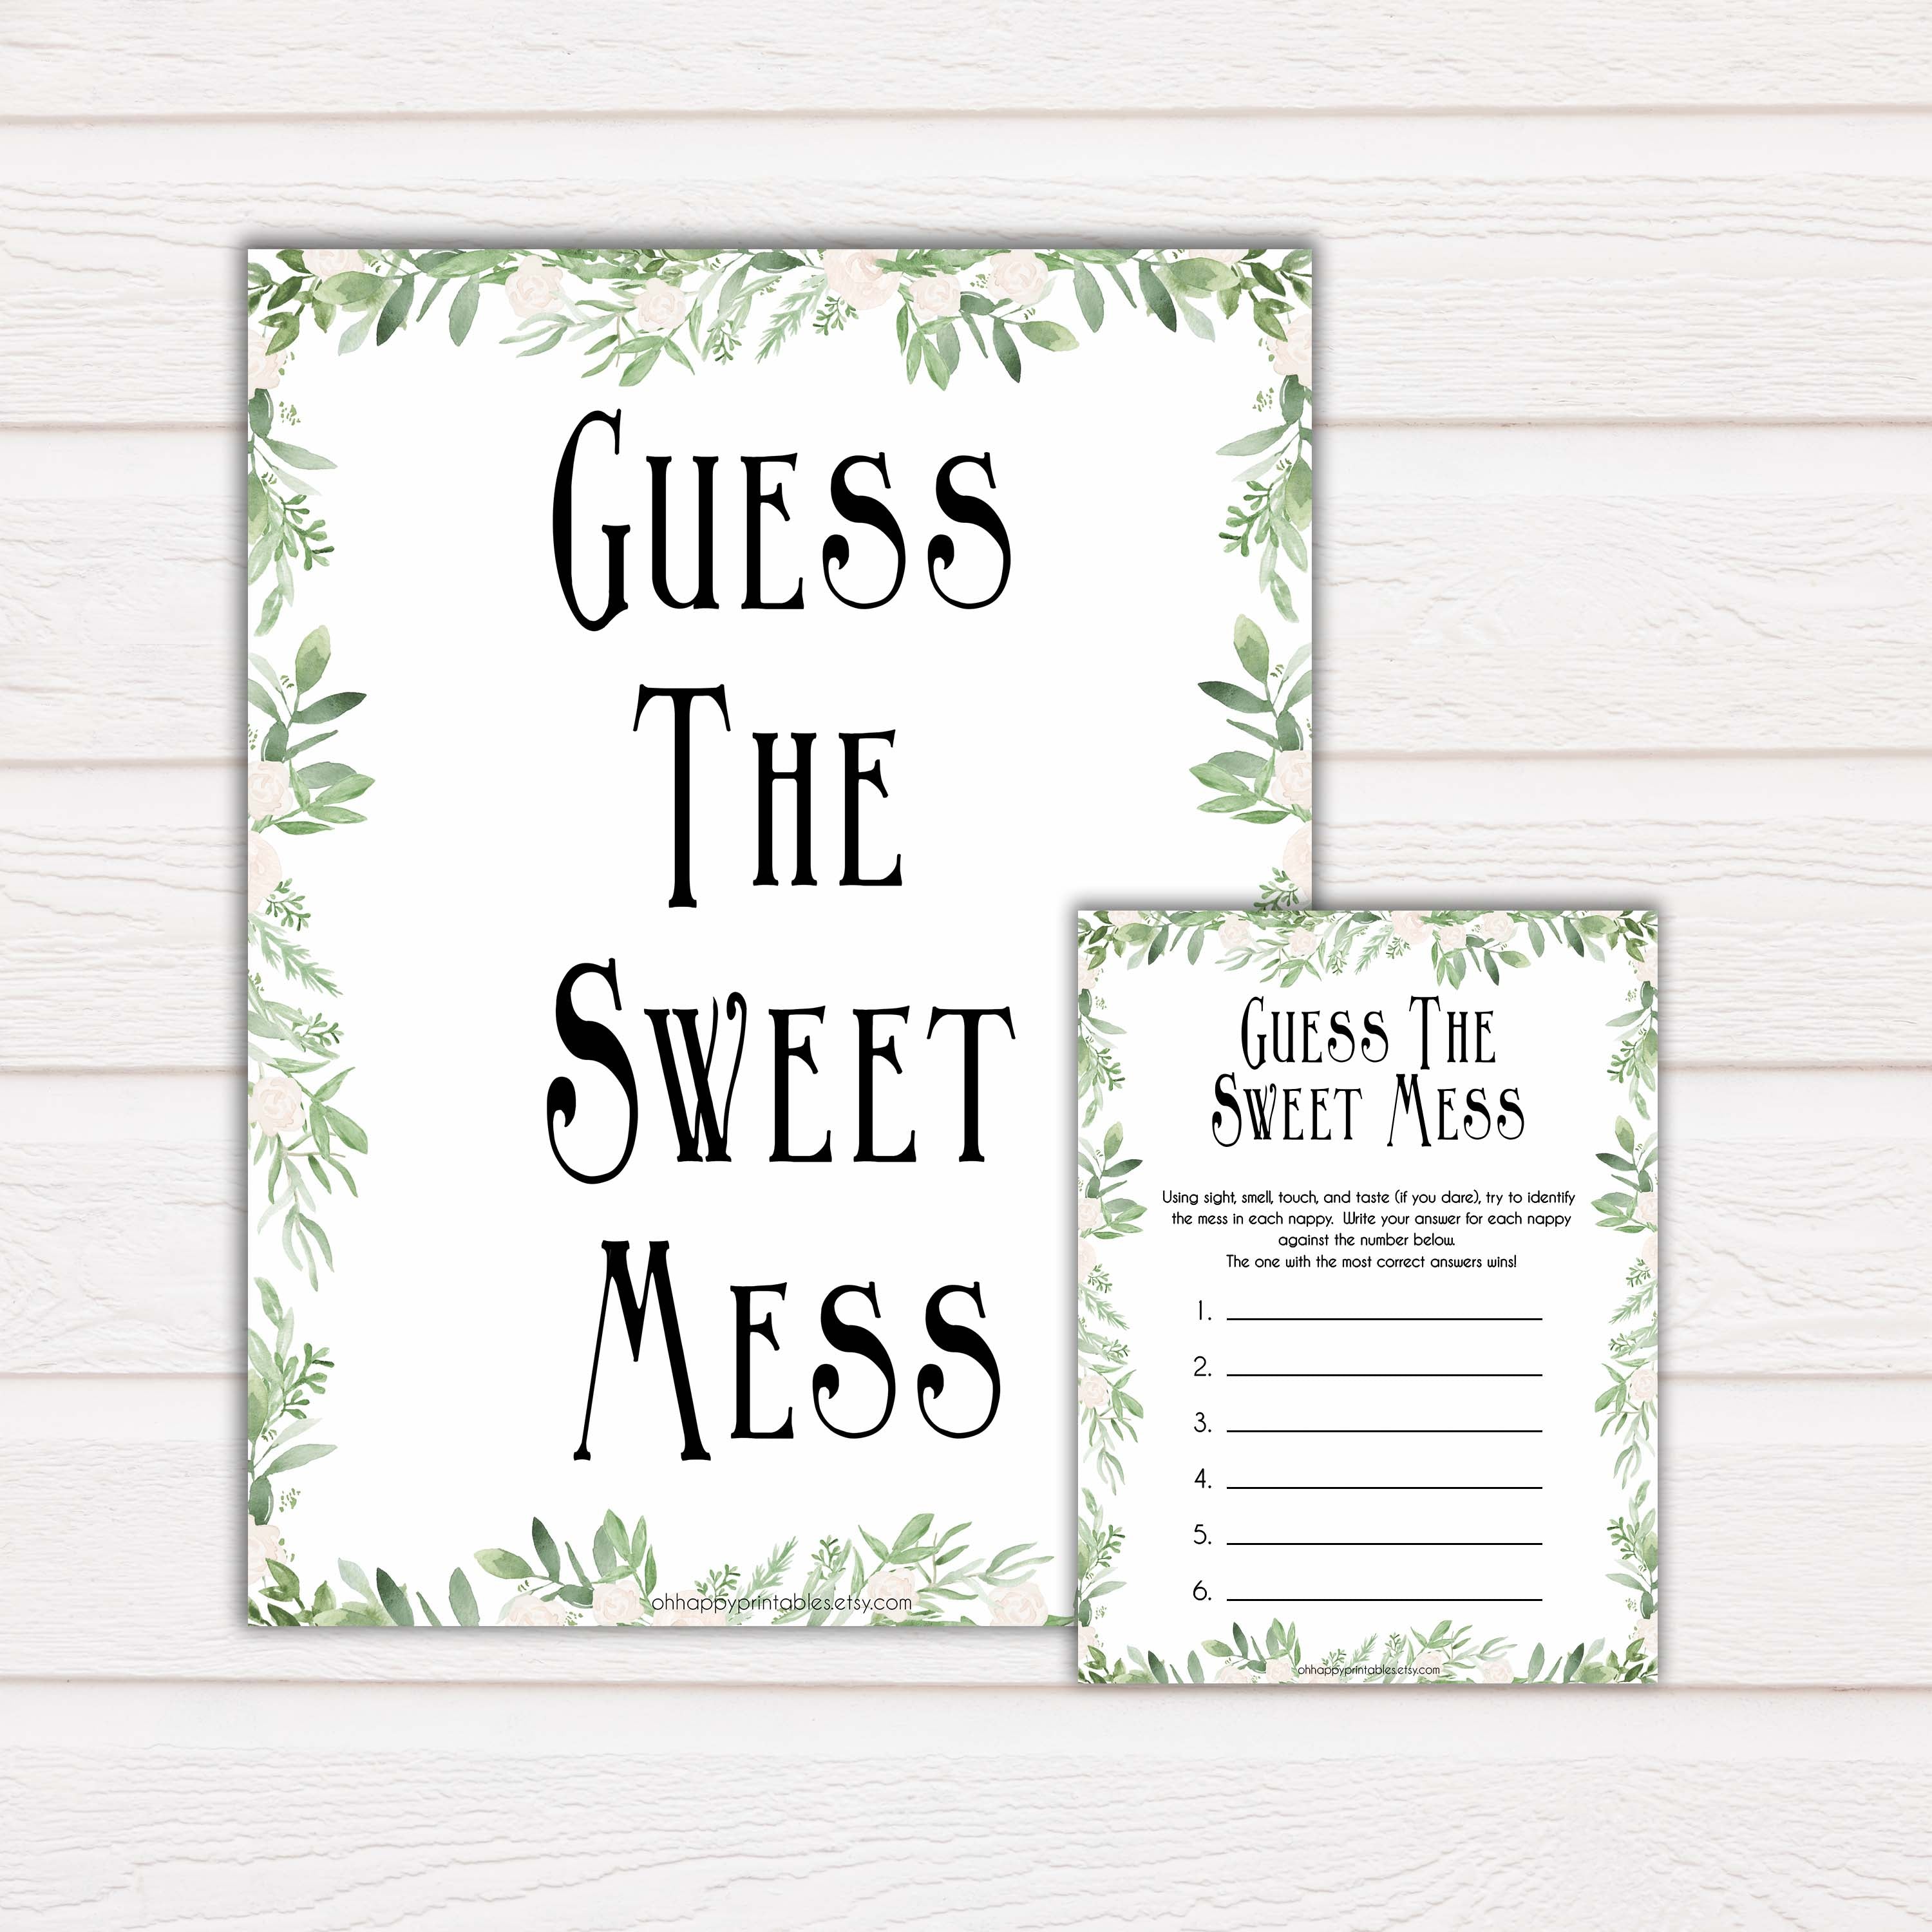 reenery Baby Shower Guess The Mess Game, Bontanical Baby Shower Guess The Sweet Mess, Baby Shower Games, Guess The Mess, Baby Games, printable baby shower games, fun baby shower games, popular baby shower games